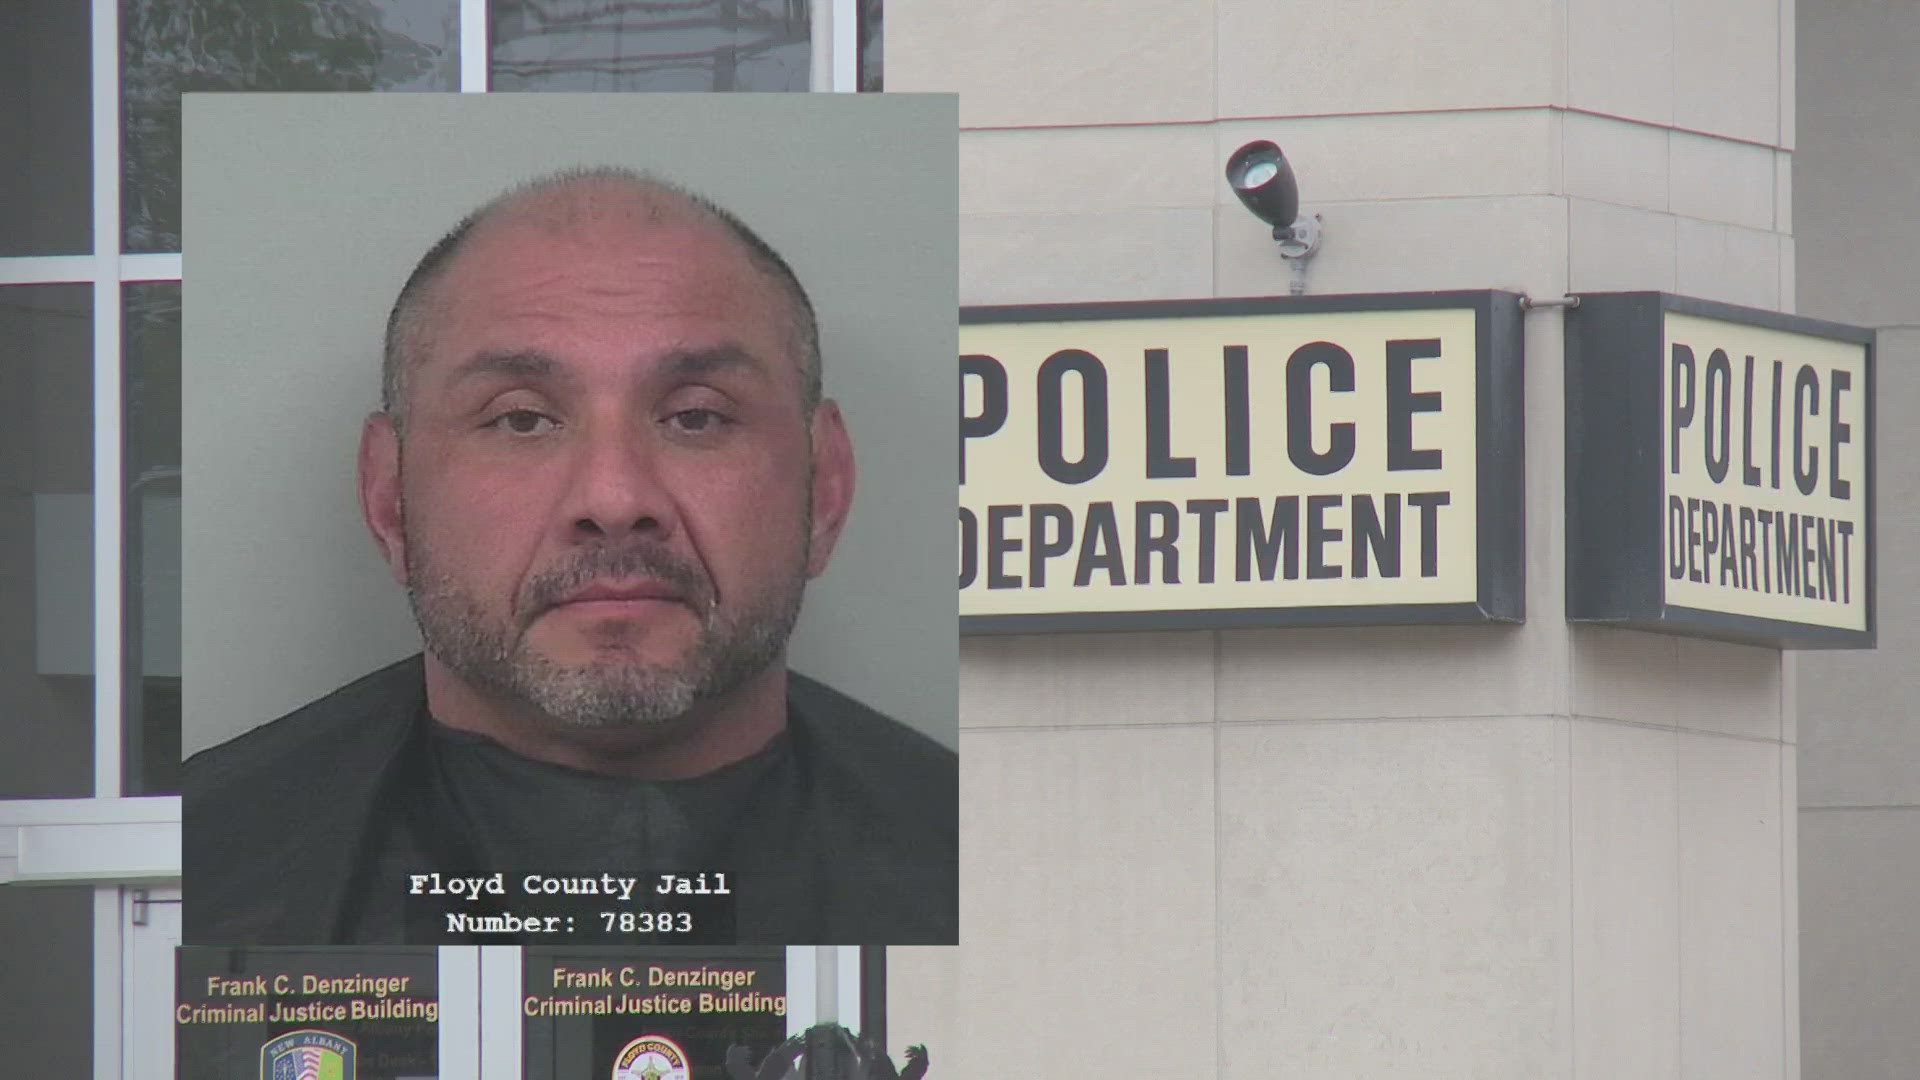 Sgt. Chad Armenta is charged with multiple felonies after officials say he stalked his ex-girlfriend.